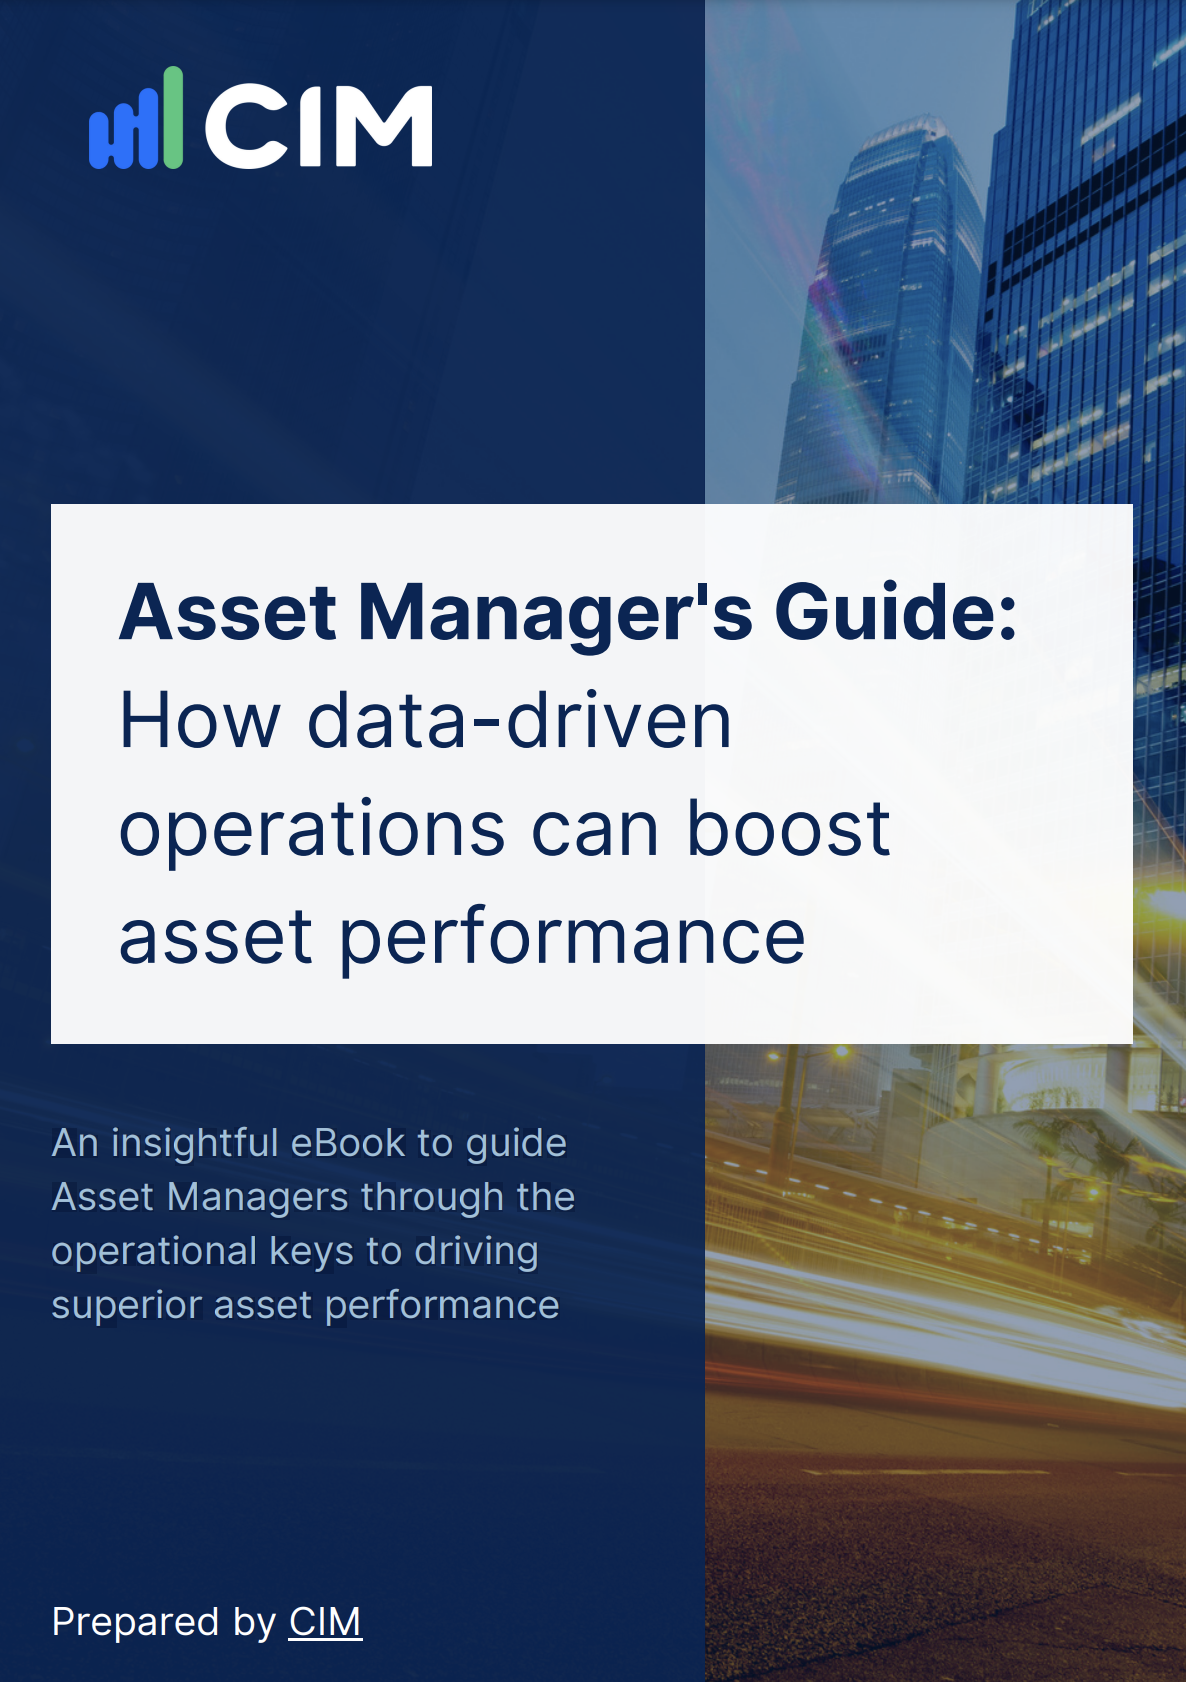 Asset Manager's Guide: How Data-Driven Operations Can Boost Asset Performance